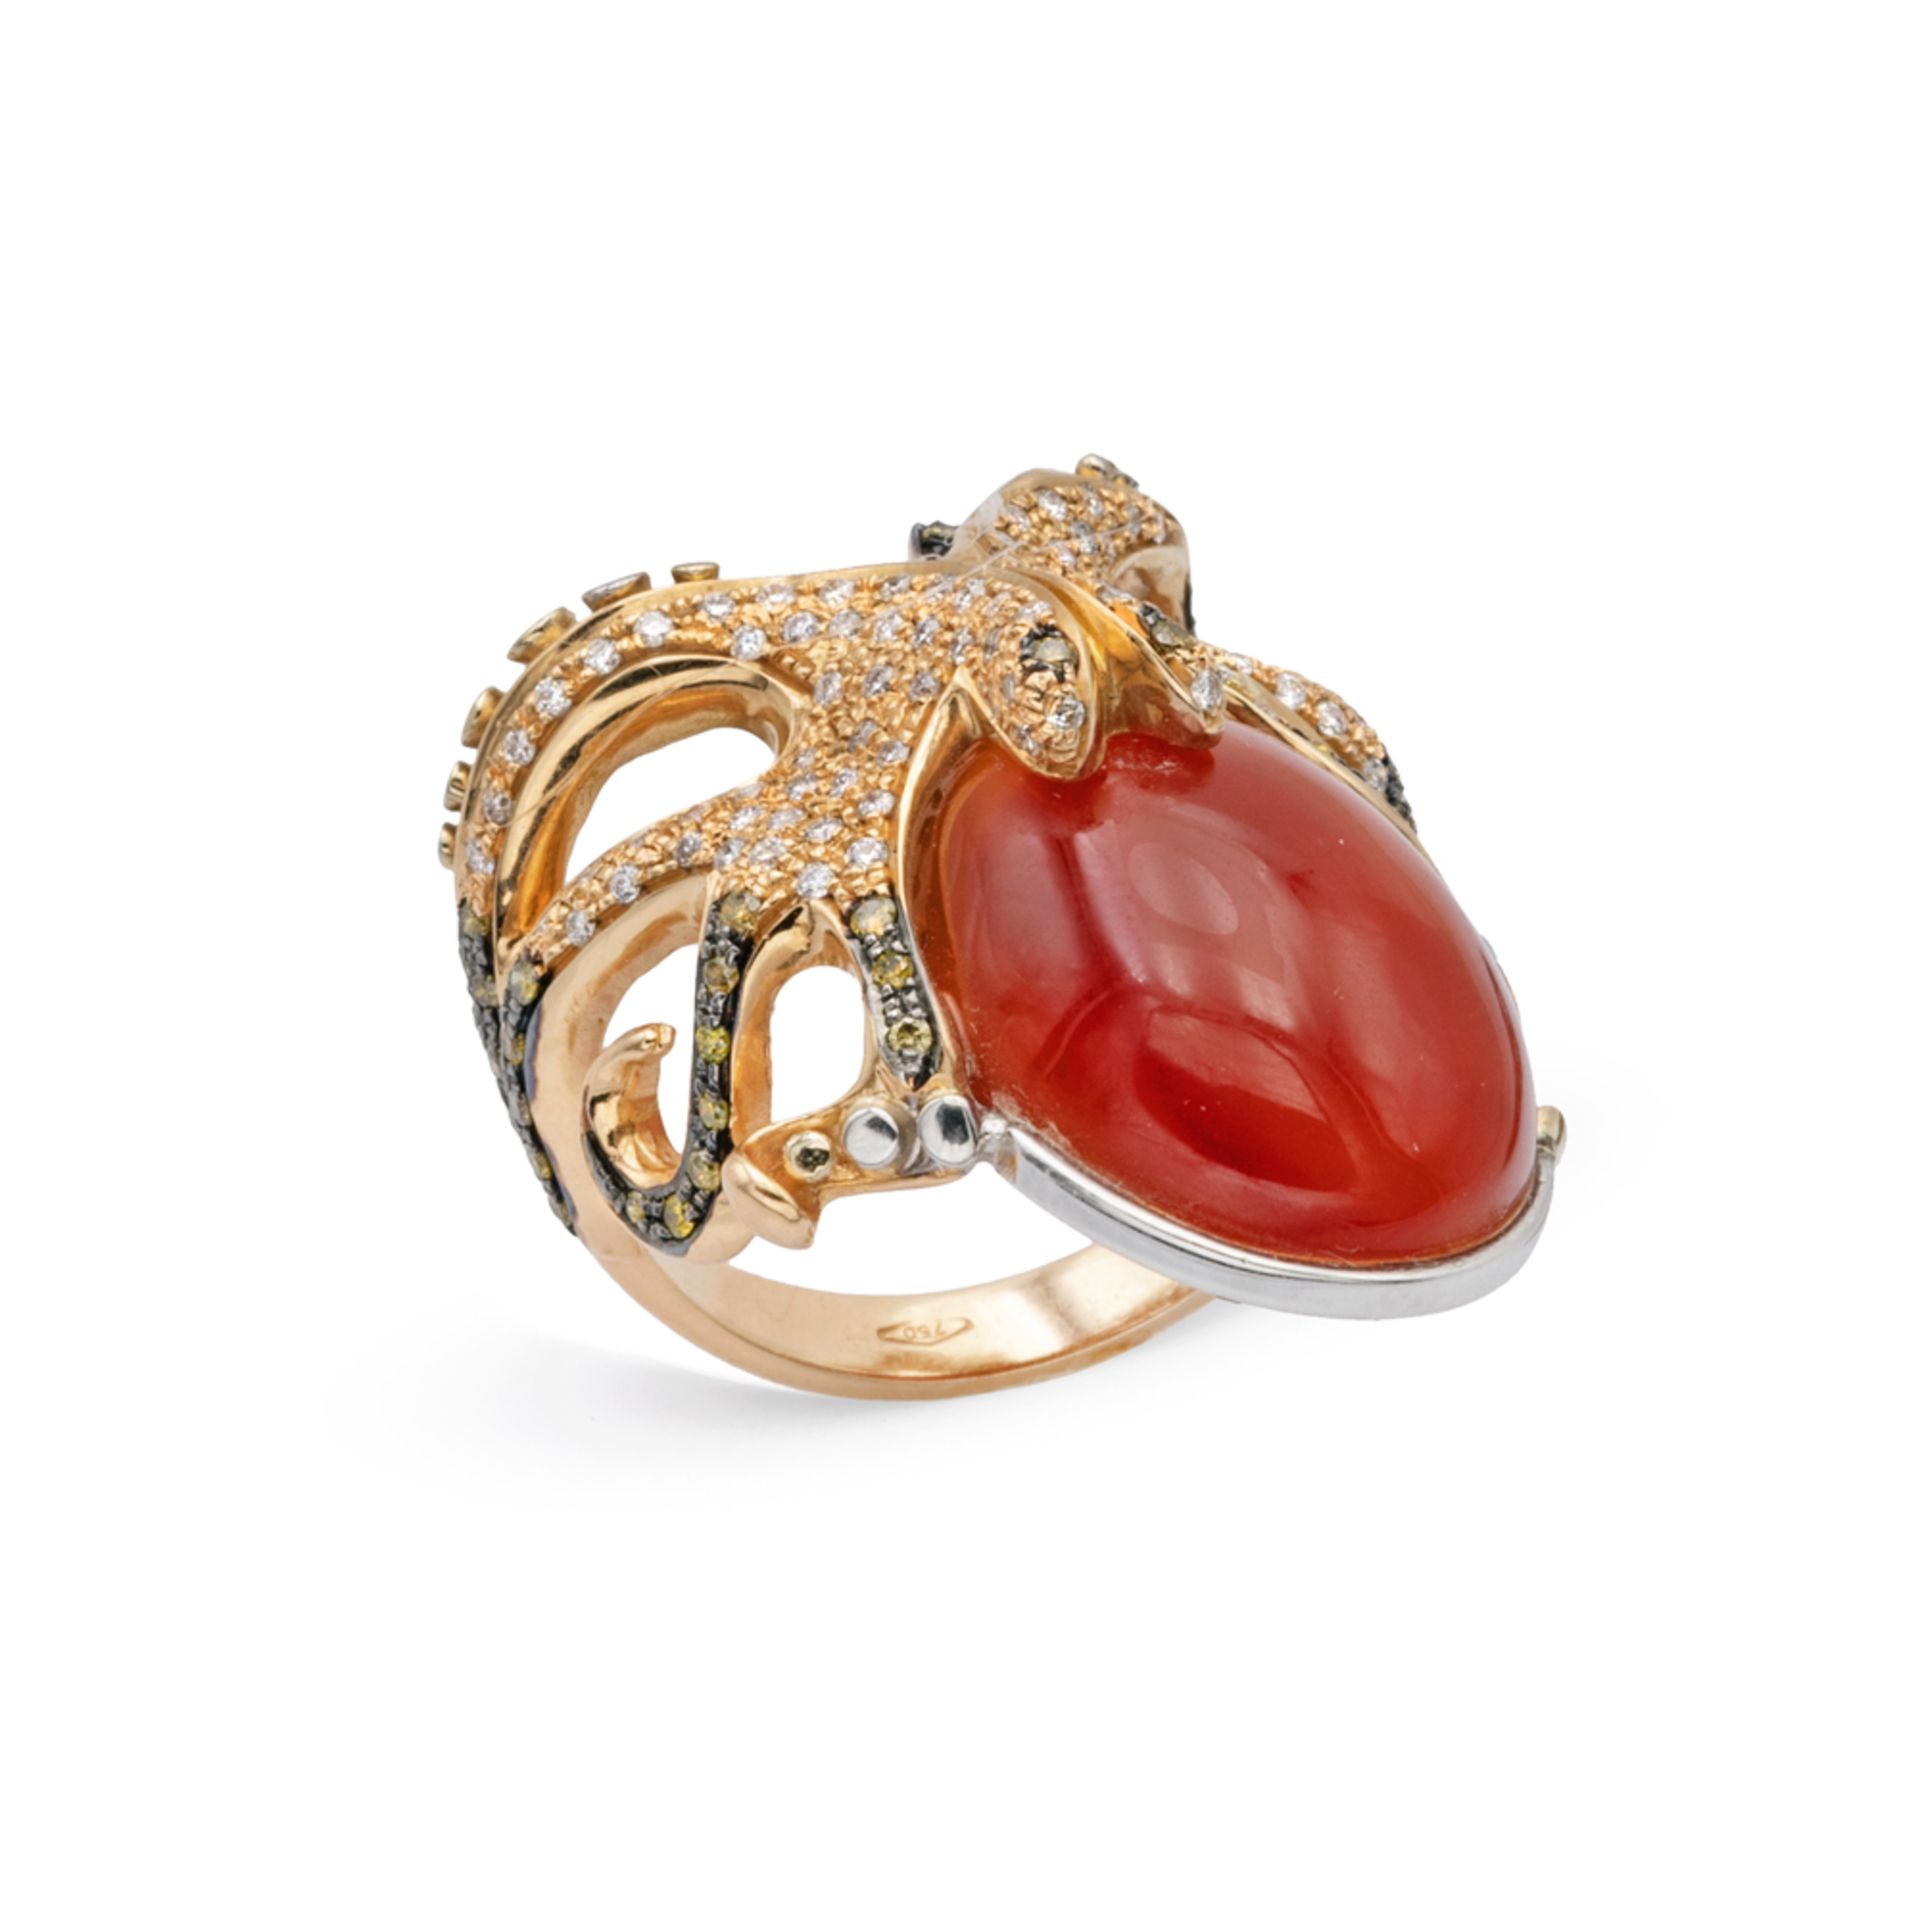 18kt rose gold carnelian and diamonds Octopus ring